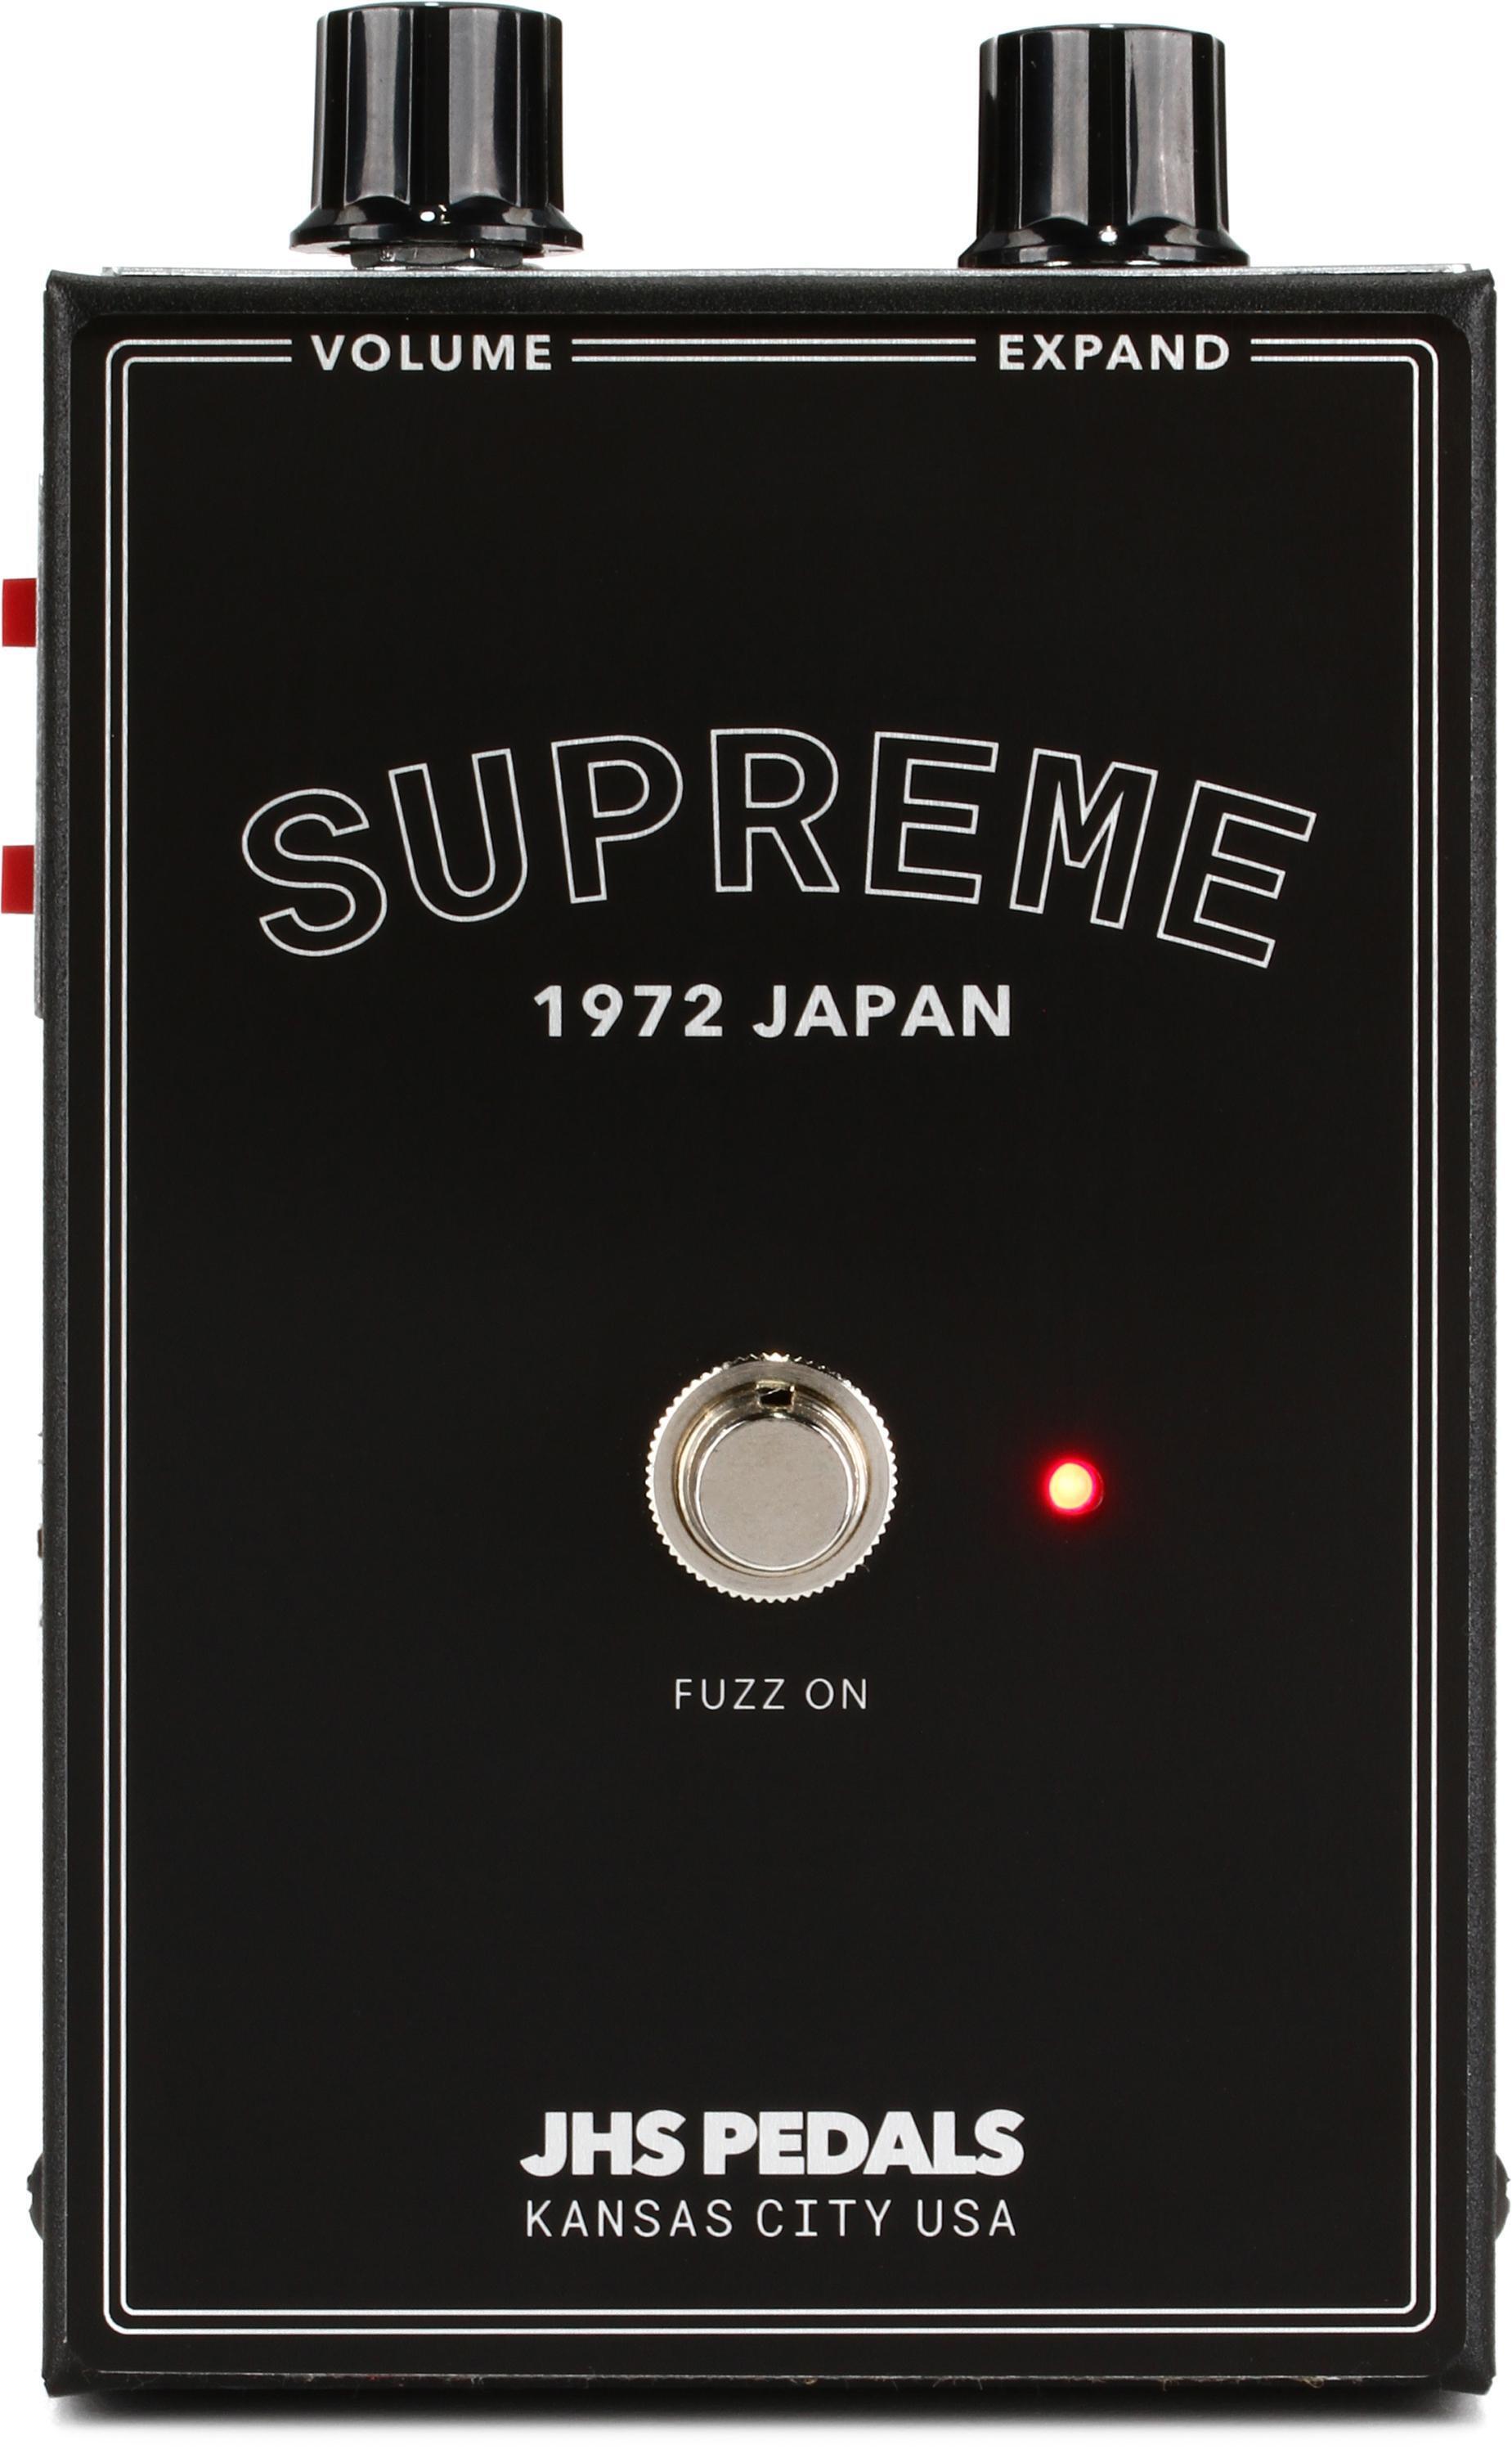 JHS Bender Vintage-style Fuzz Effect Pedal | Sweetwater